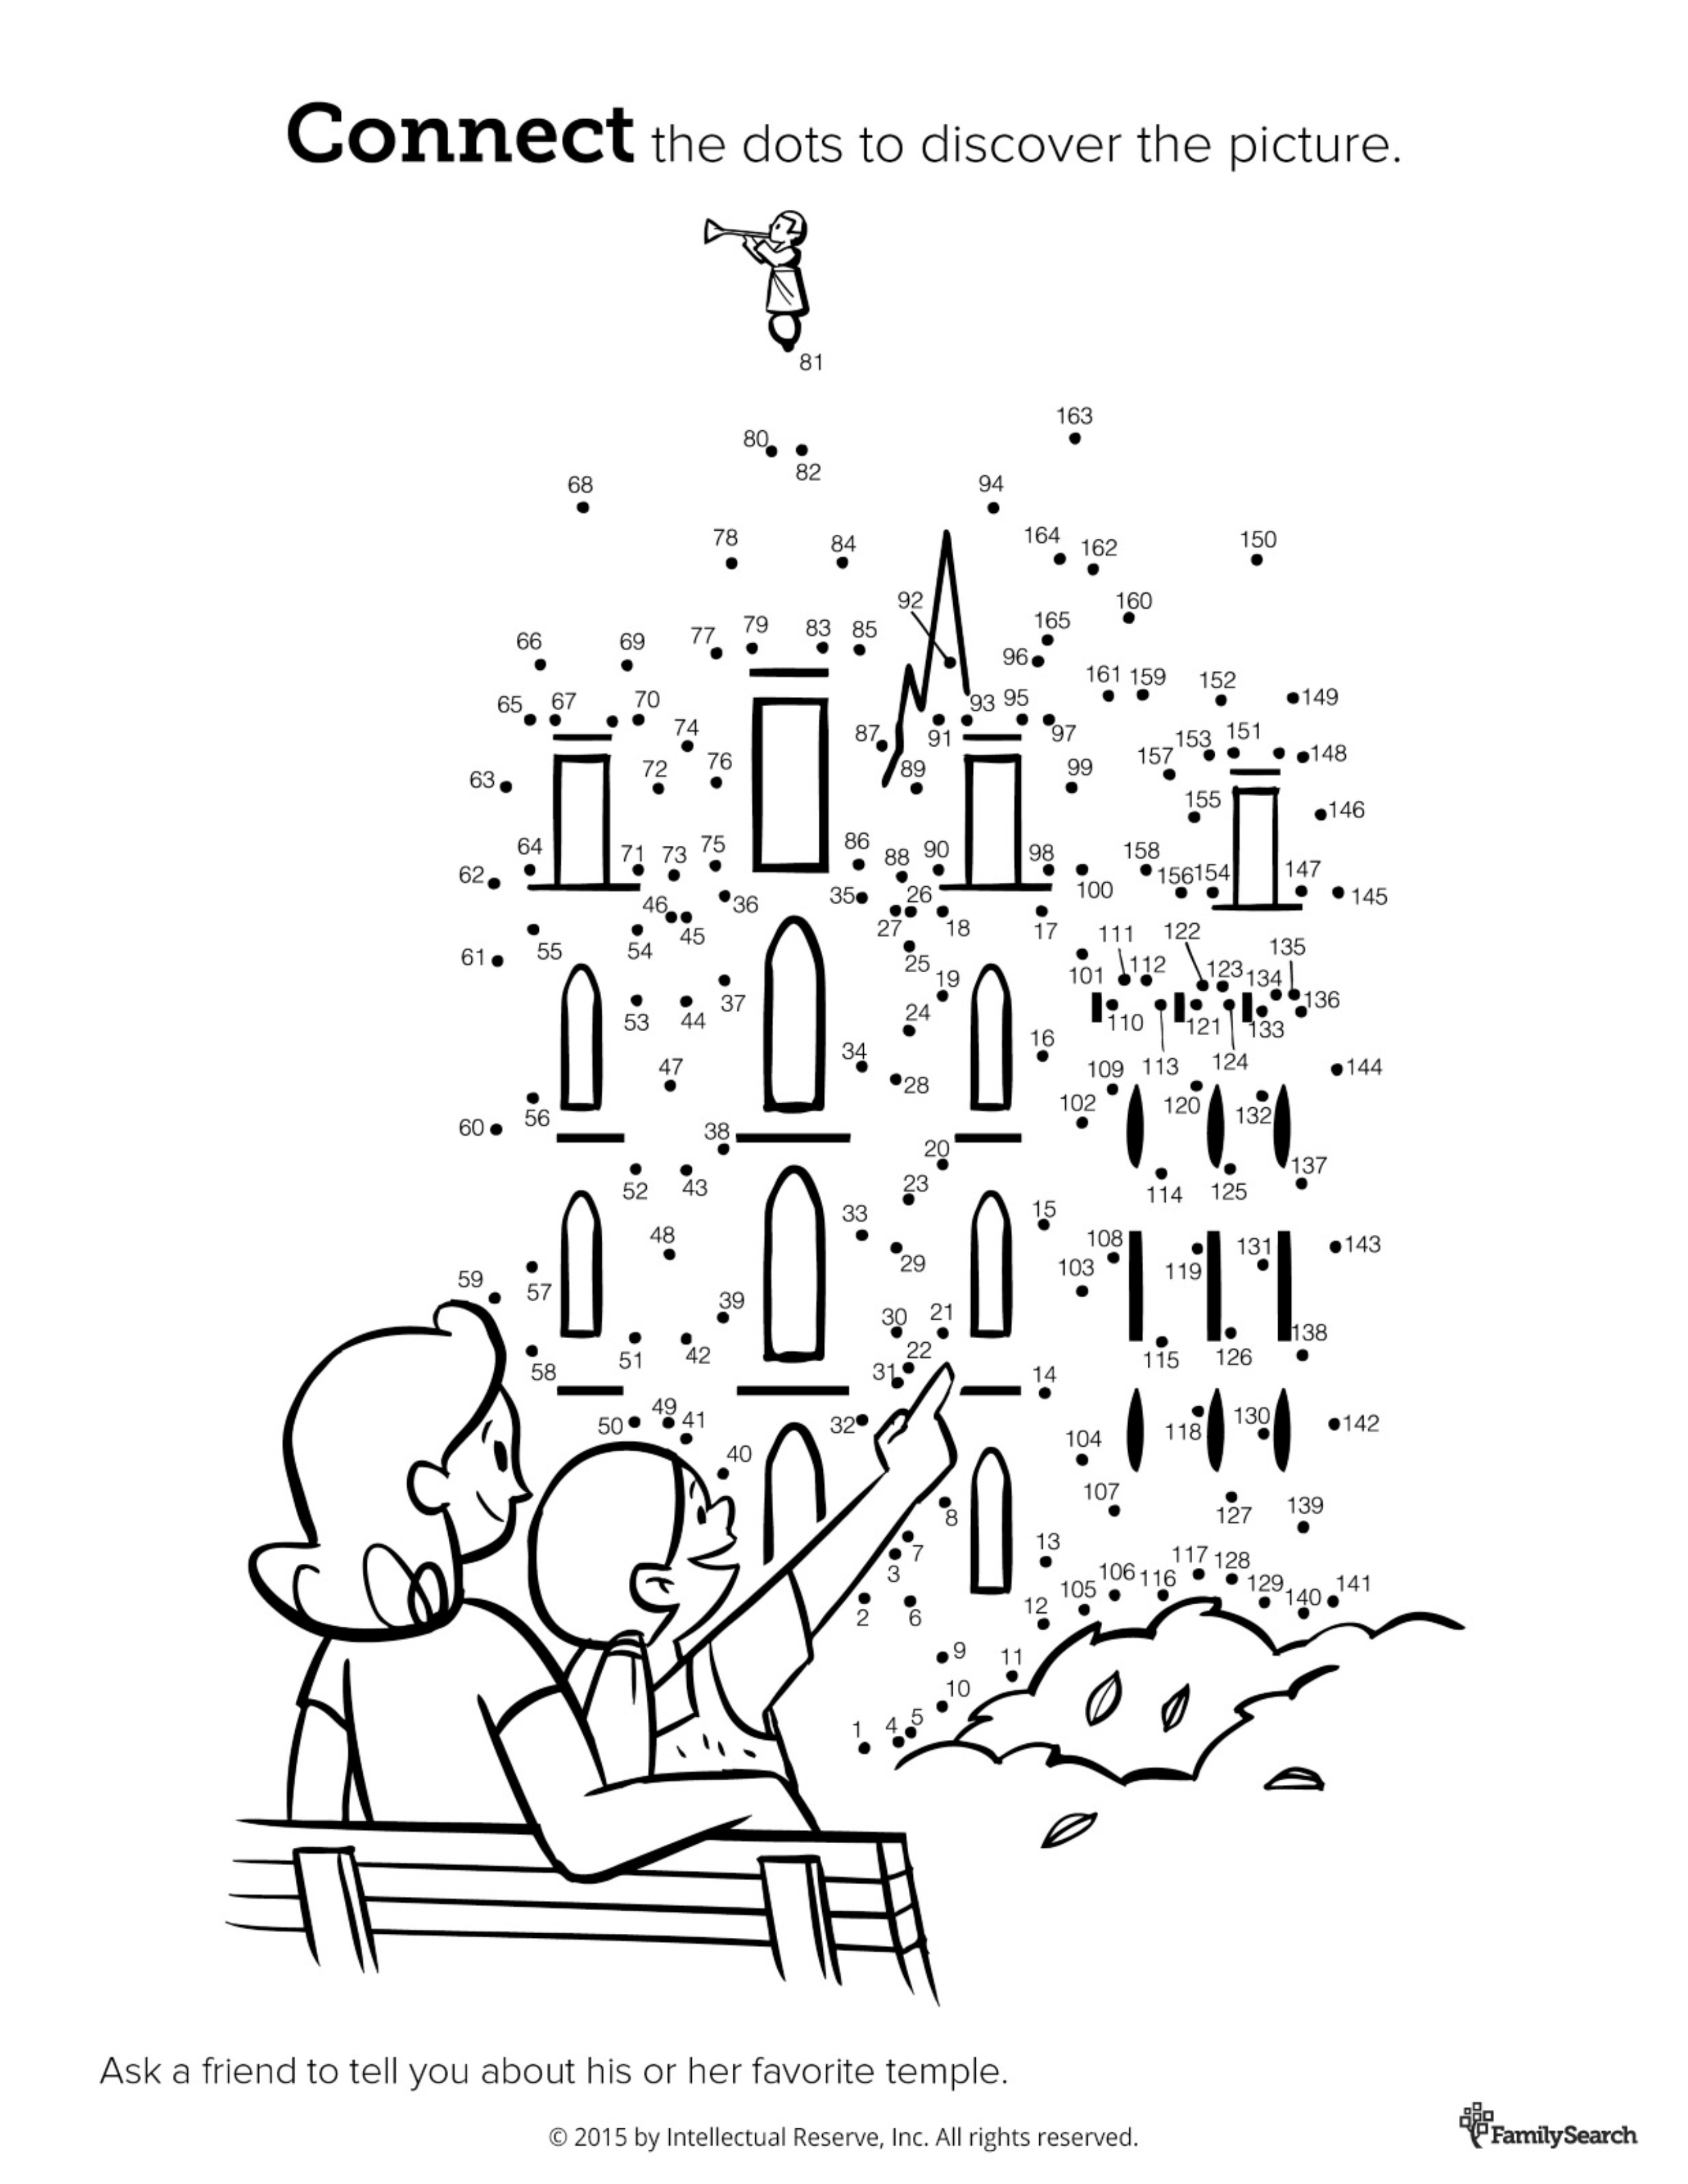 coloring dot to dot pages